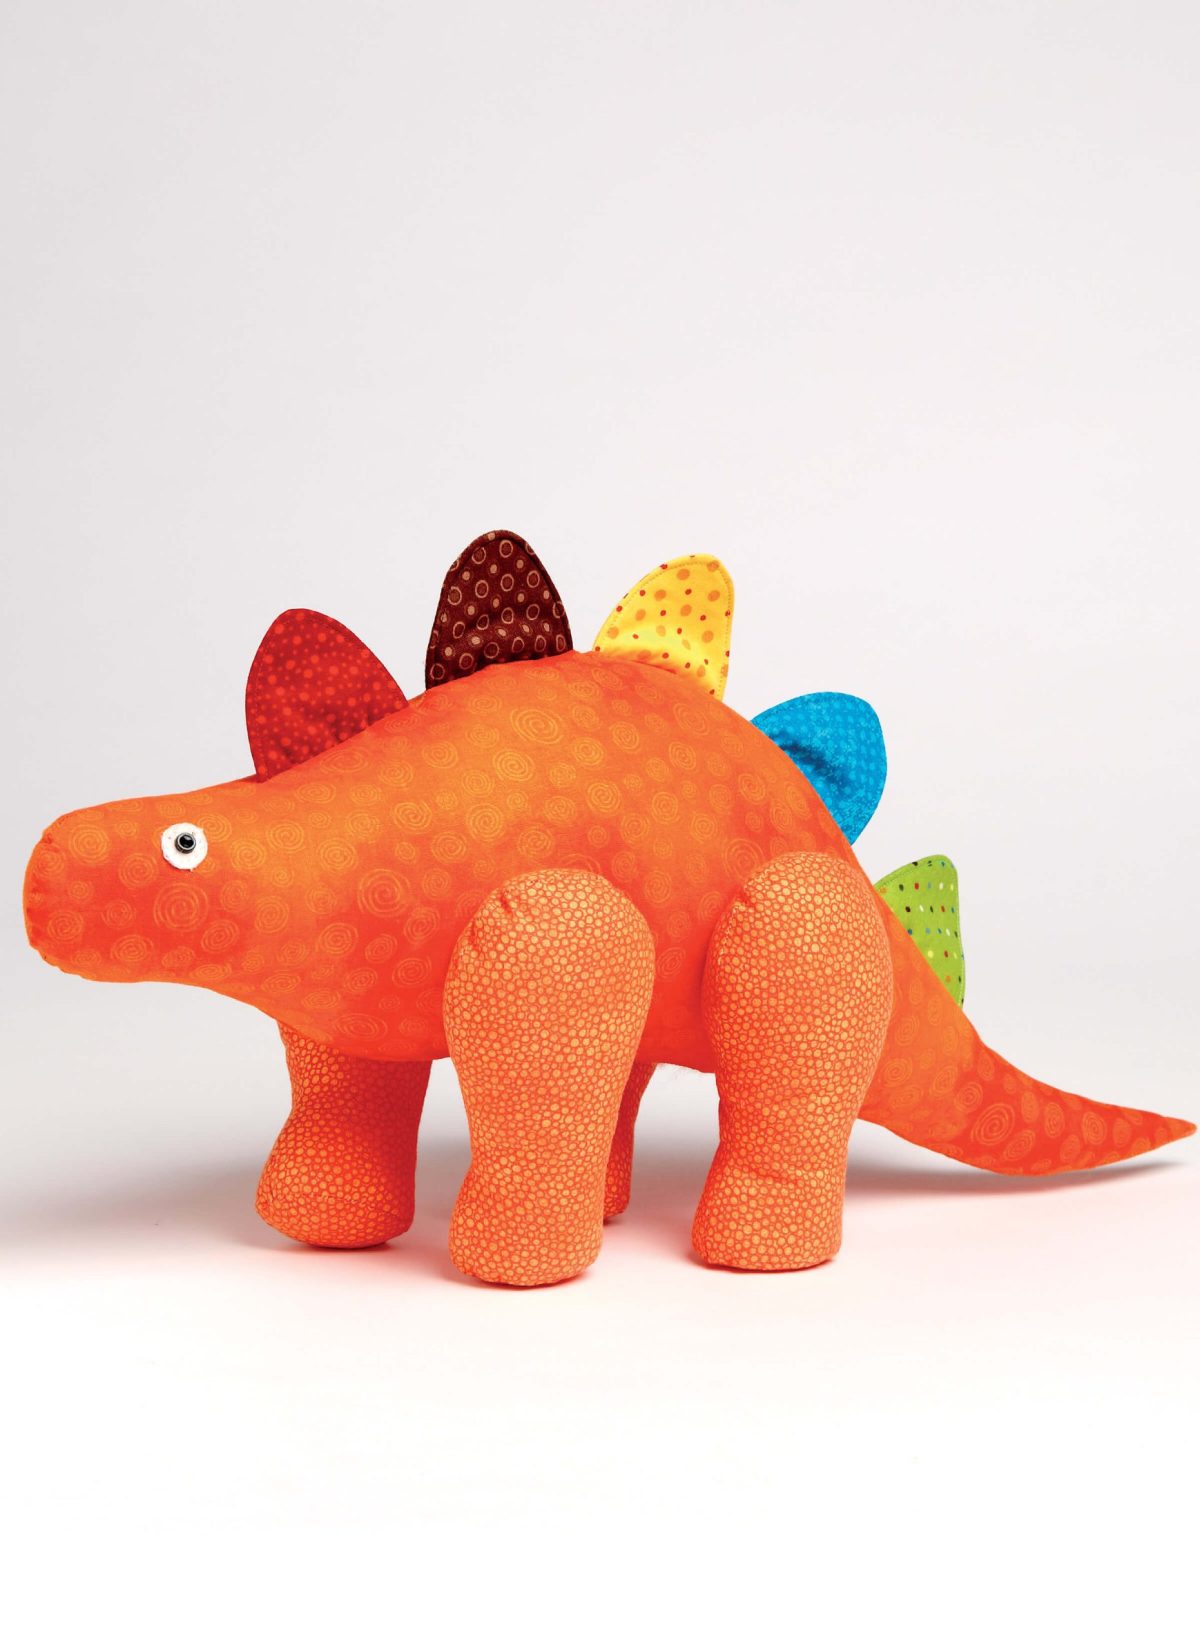 McCall's Sewing Pattern M7553 Dinosaur Plush Toys and Appliquéd Quilt